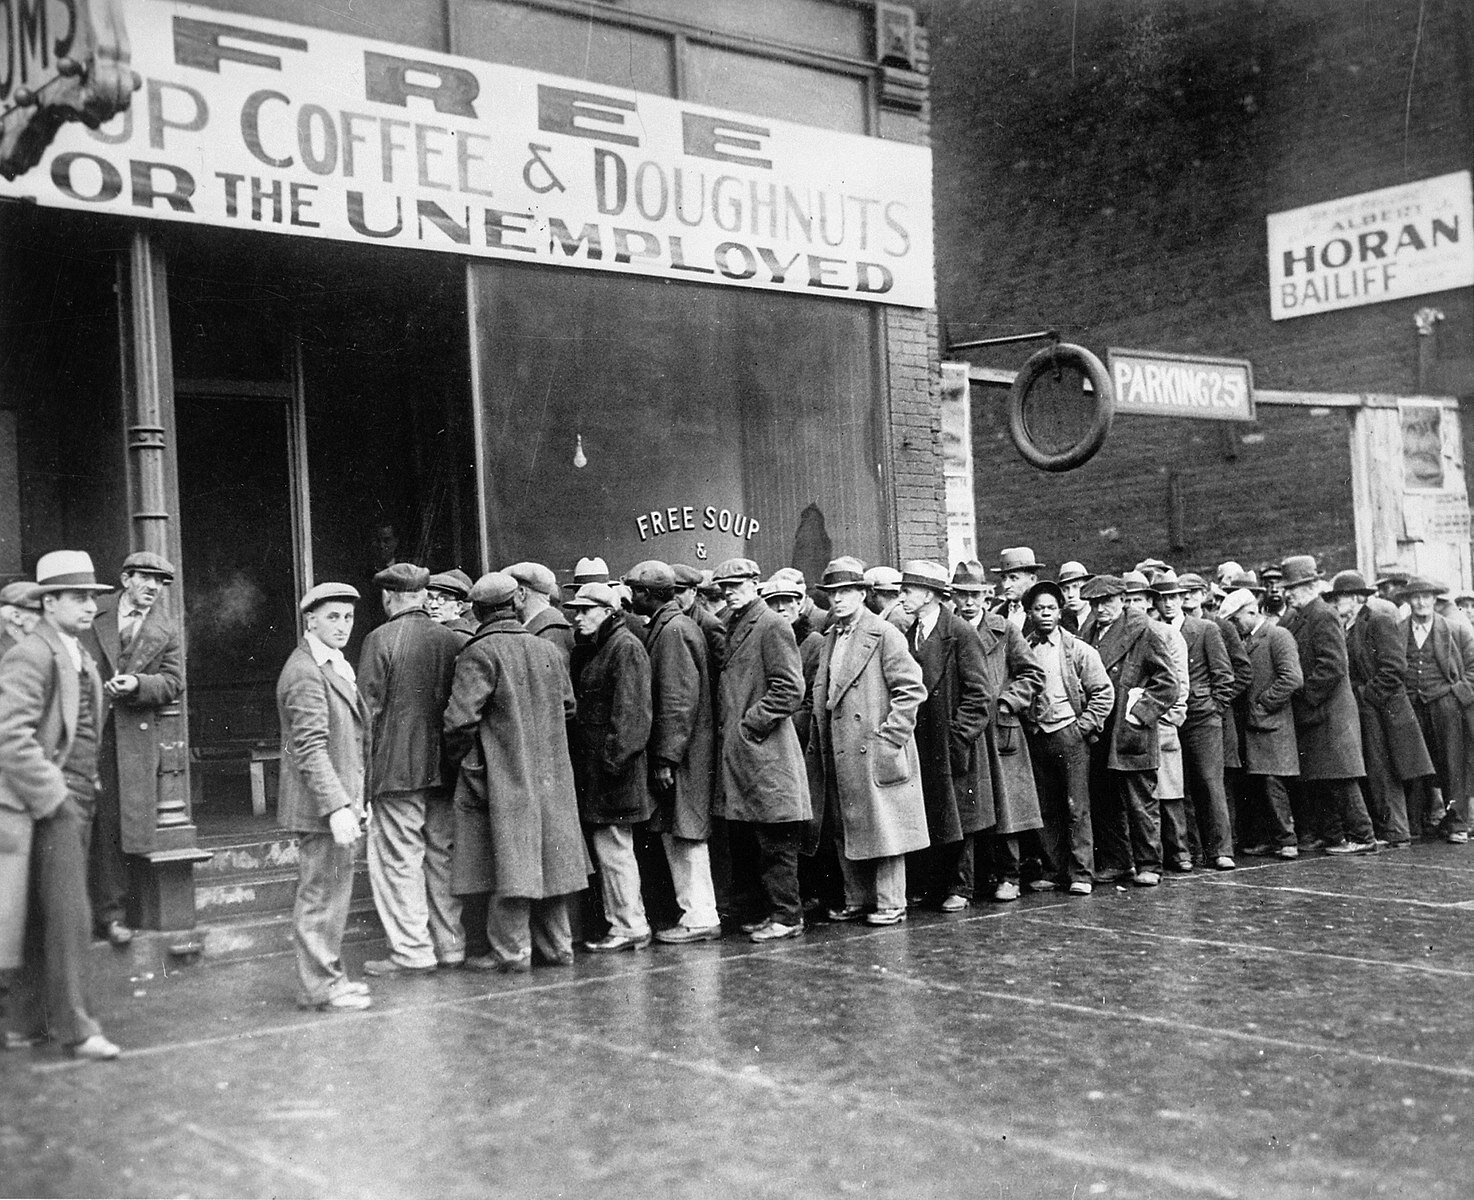  Unemployed men queued outside a depression soup kitchen opened in Chicago by Al Capone, 1931. 